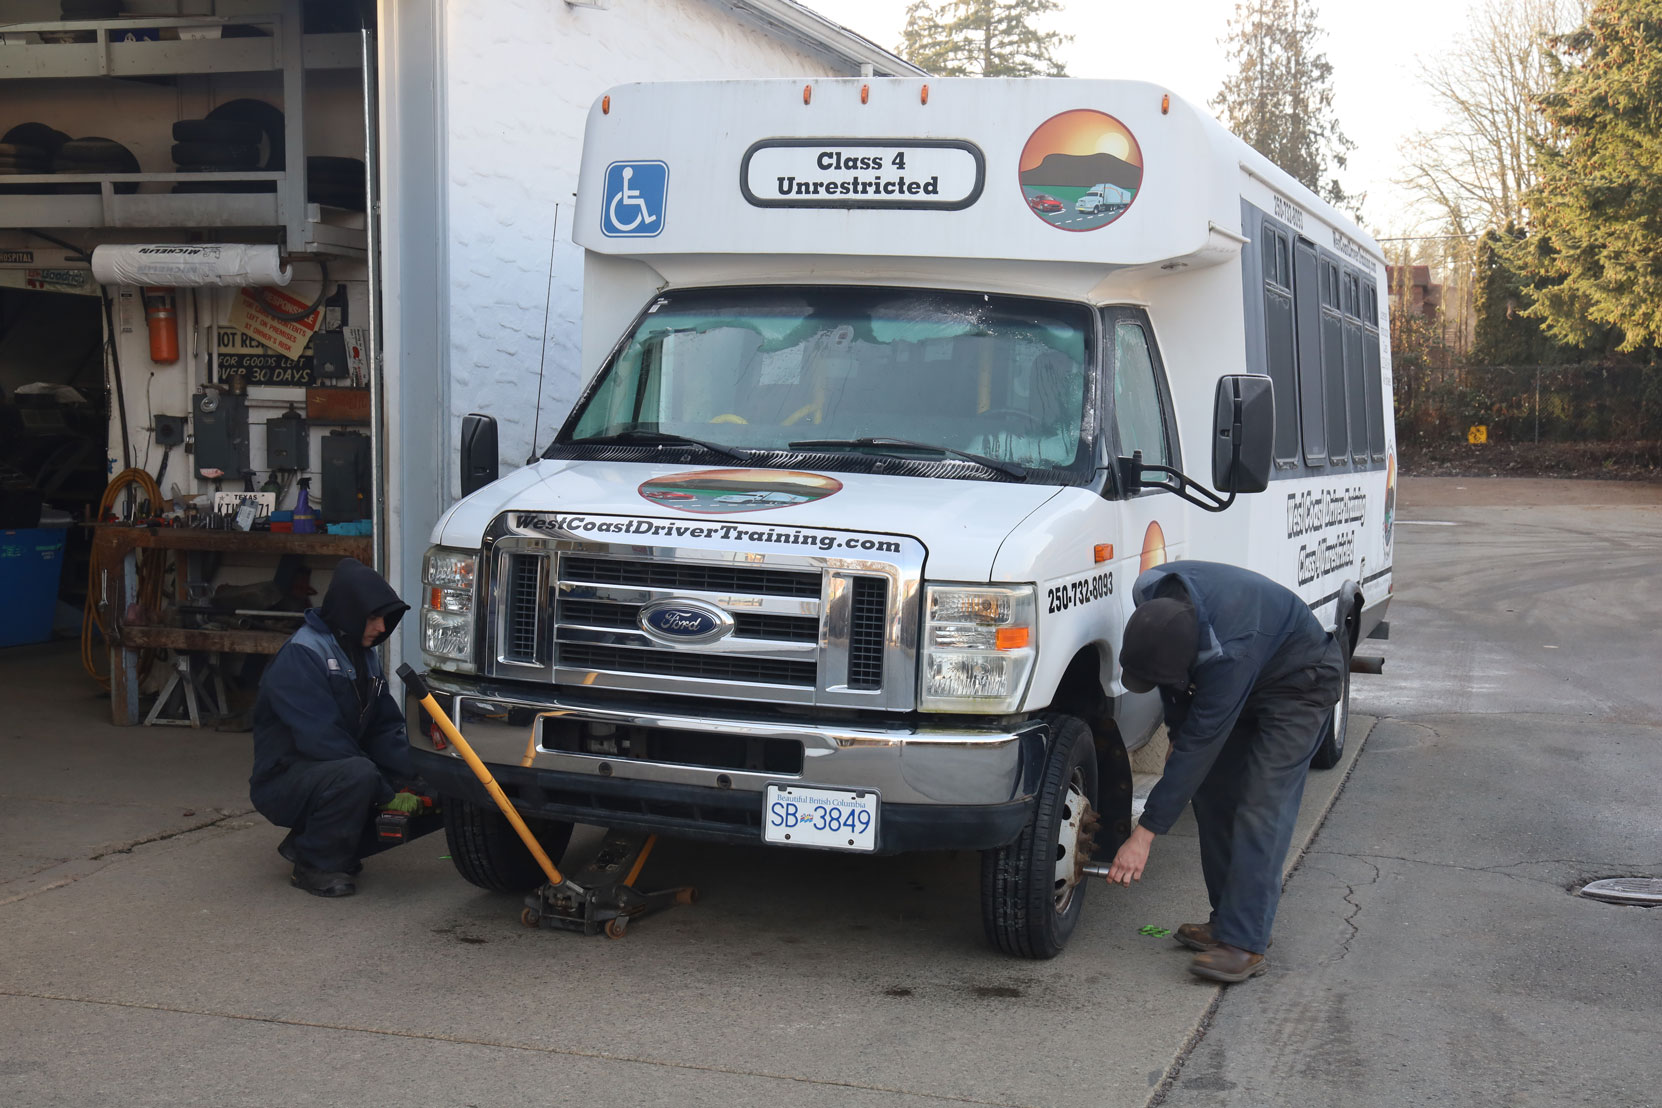 Our Ford E450 bus after getting new steering axle tires installed at Joe's Tire Hospital, February 2023 [photo: West Coast Driver Training]